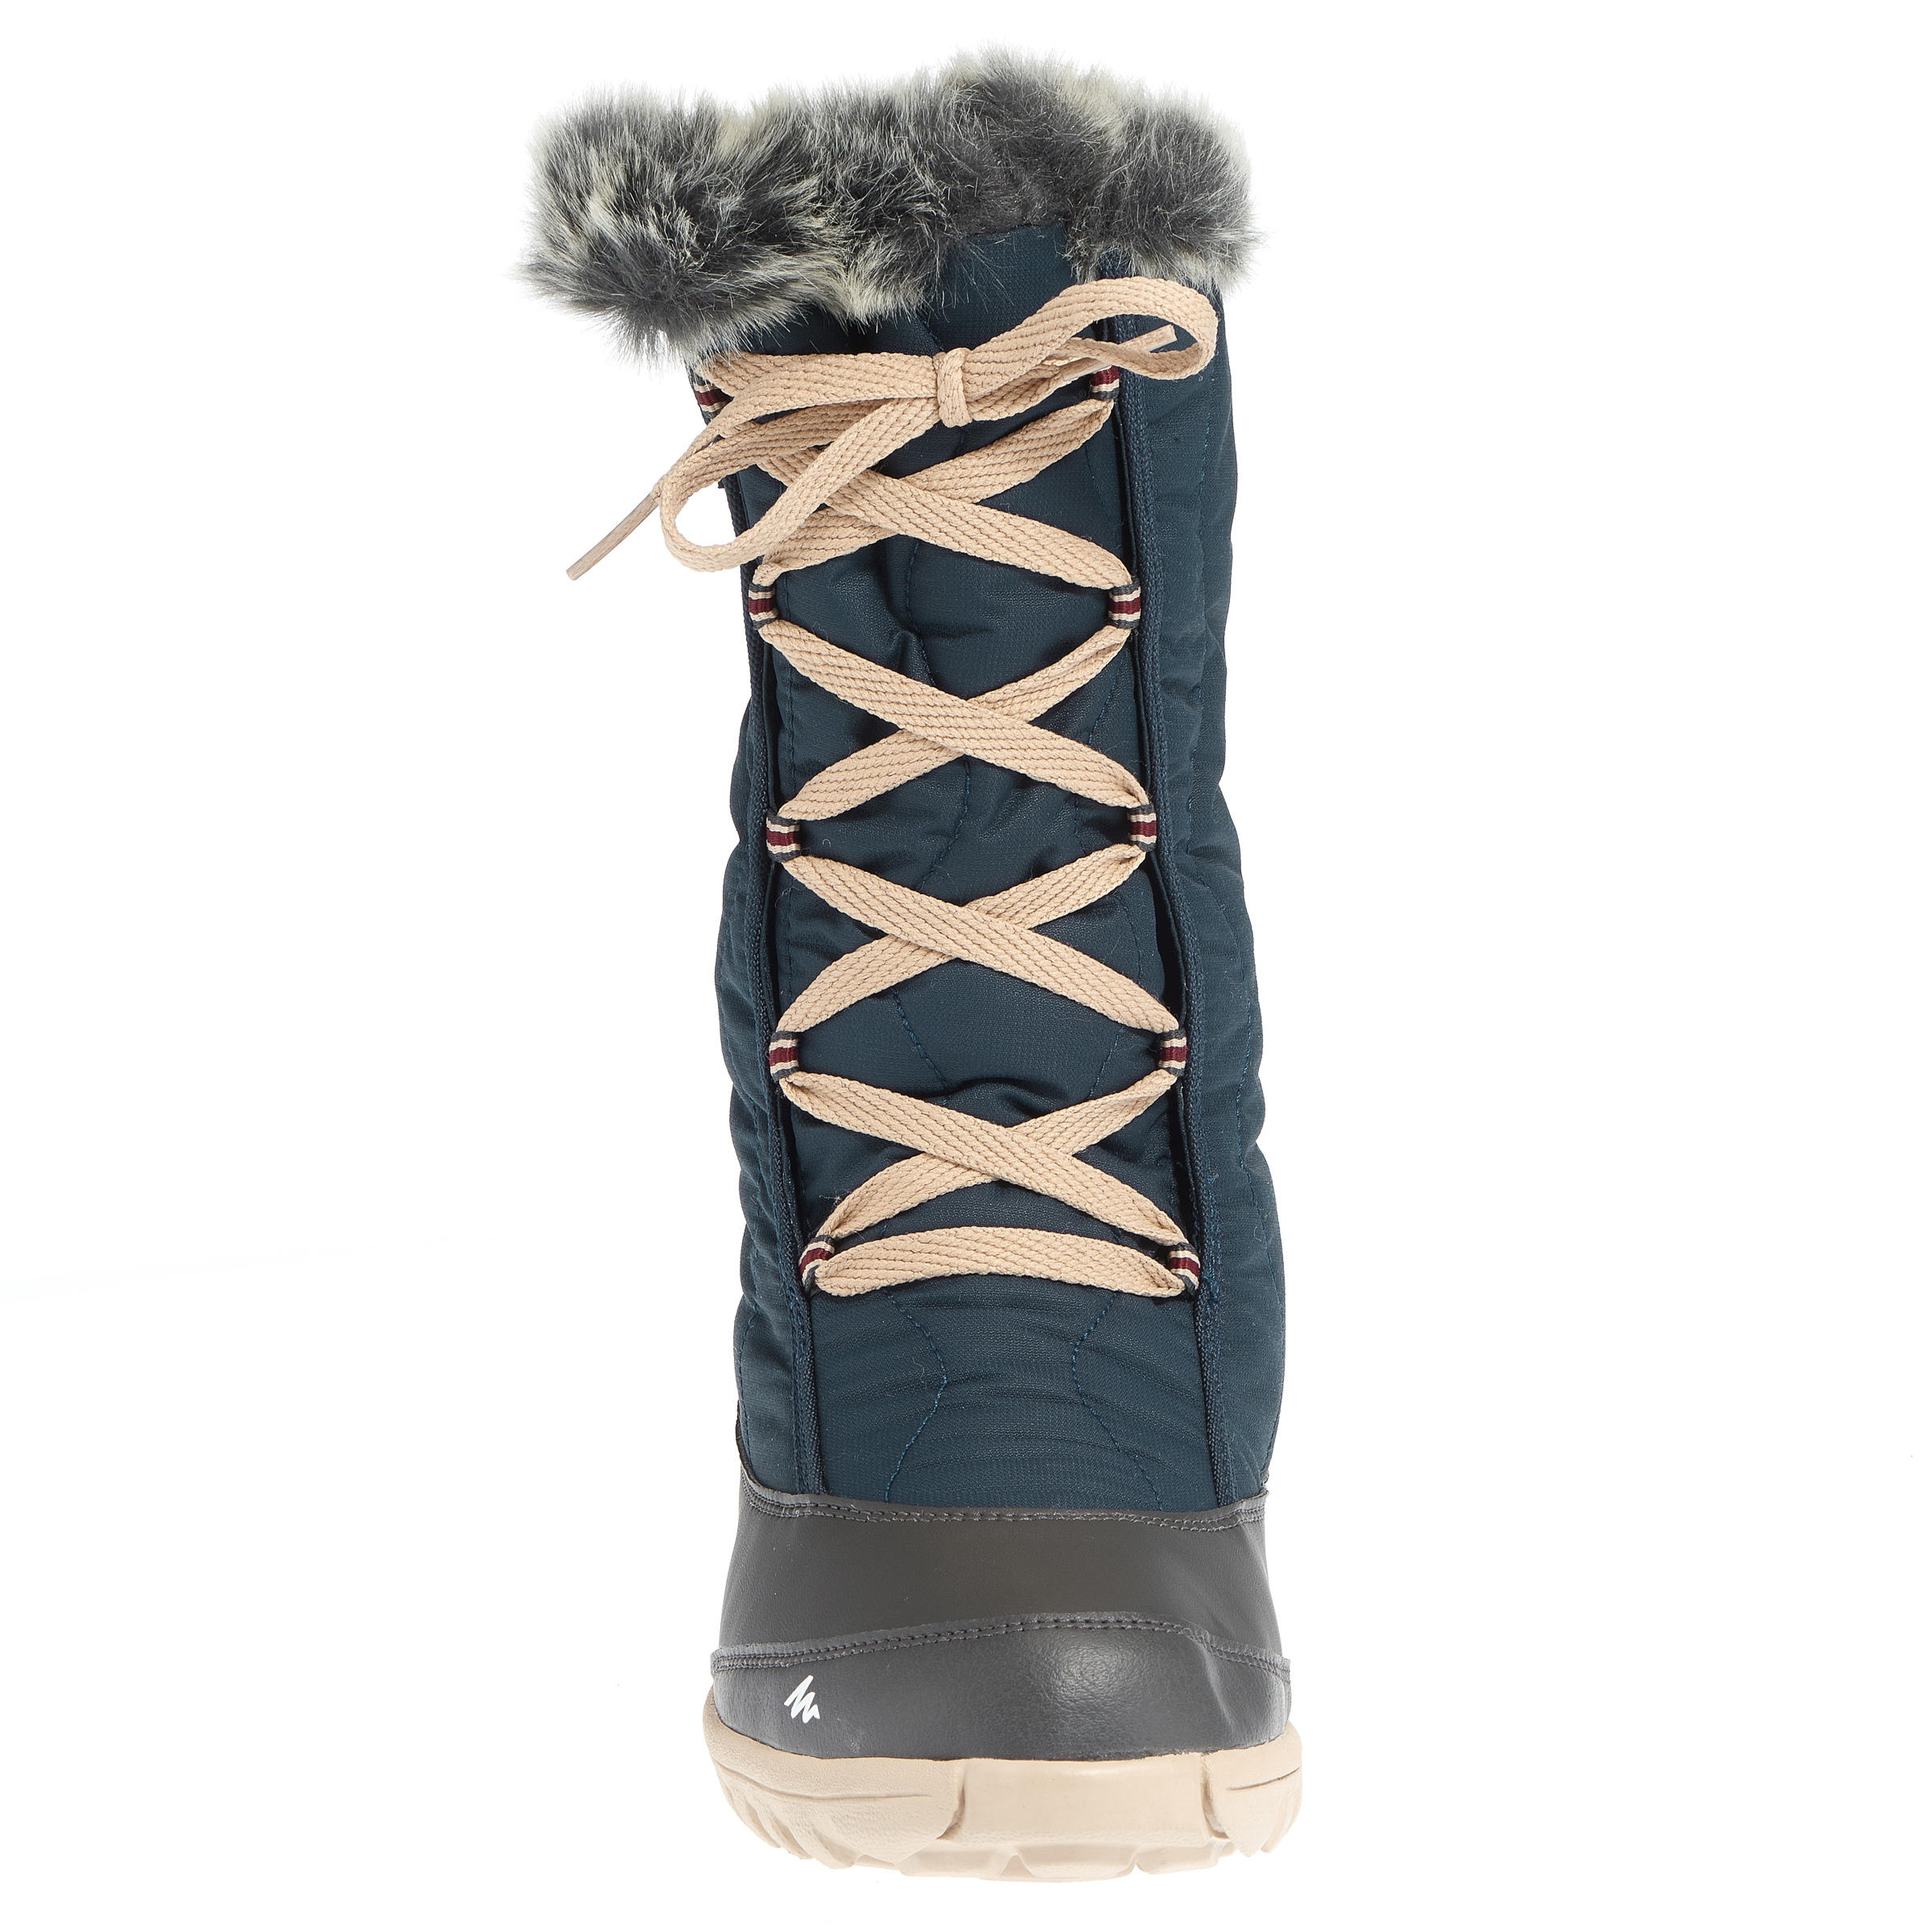 SH500 x-warm blue snow boots with laces 5/12